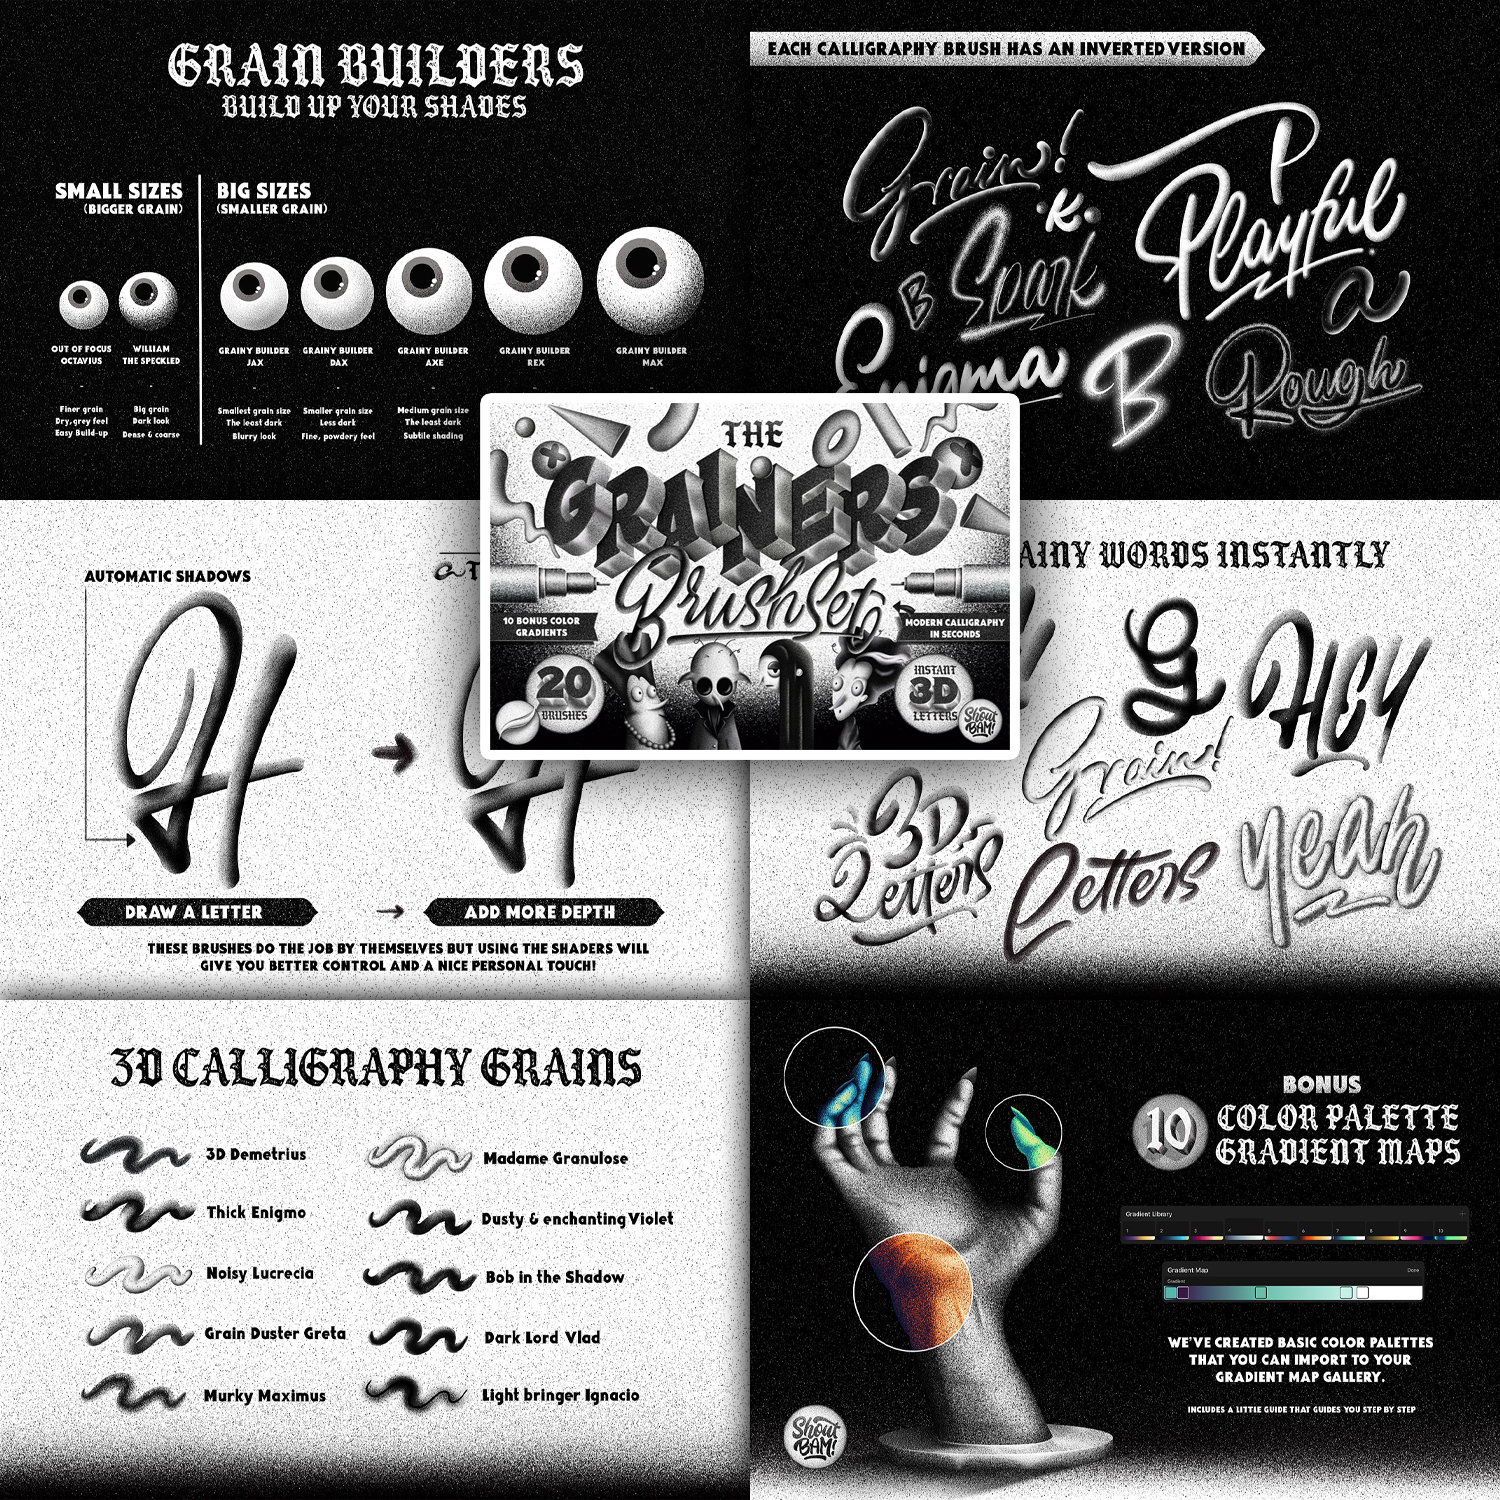 Preview the grainers brush set.